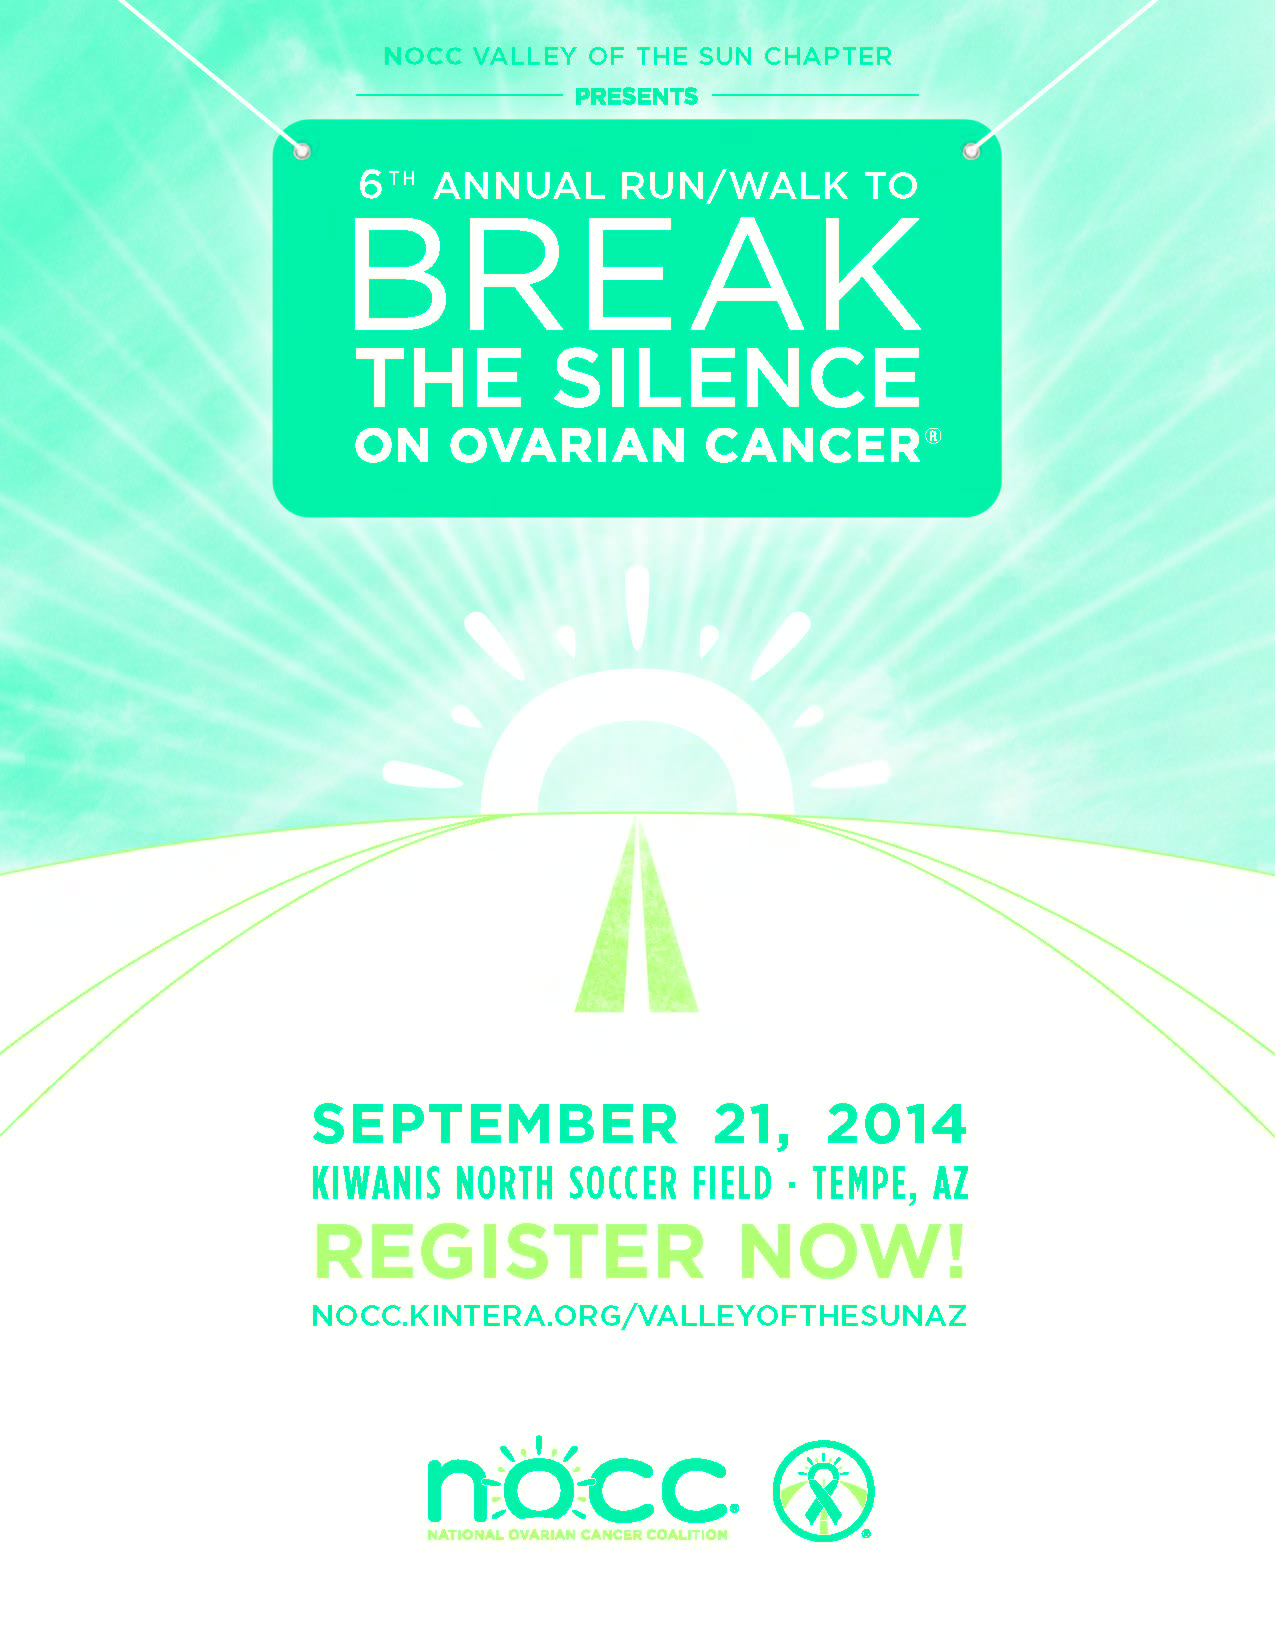 2014 Event Flyer for NOCC - Valley of the Sun Chapter's Ovarian Cancer Run/Walk